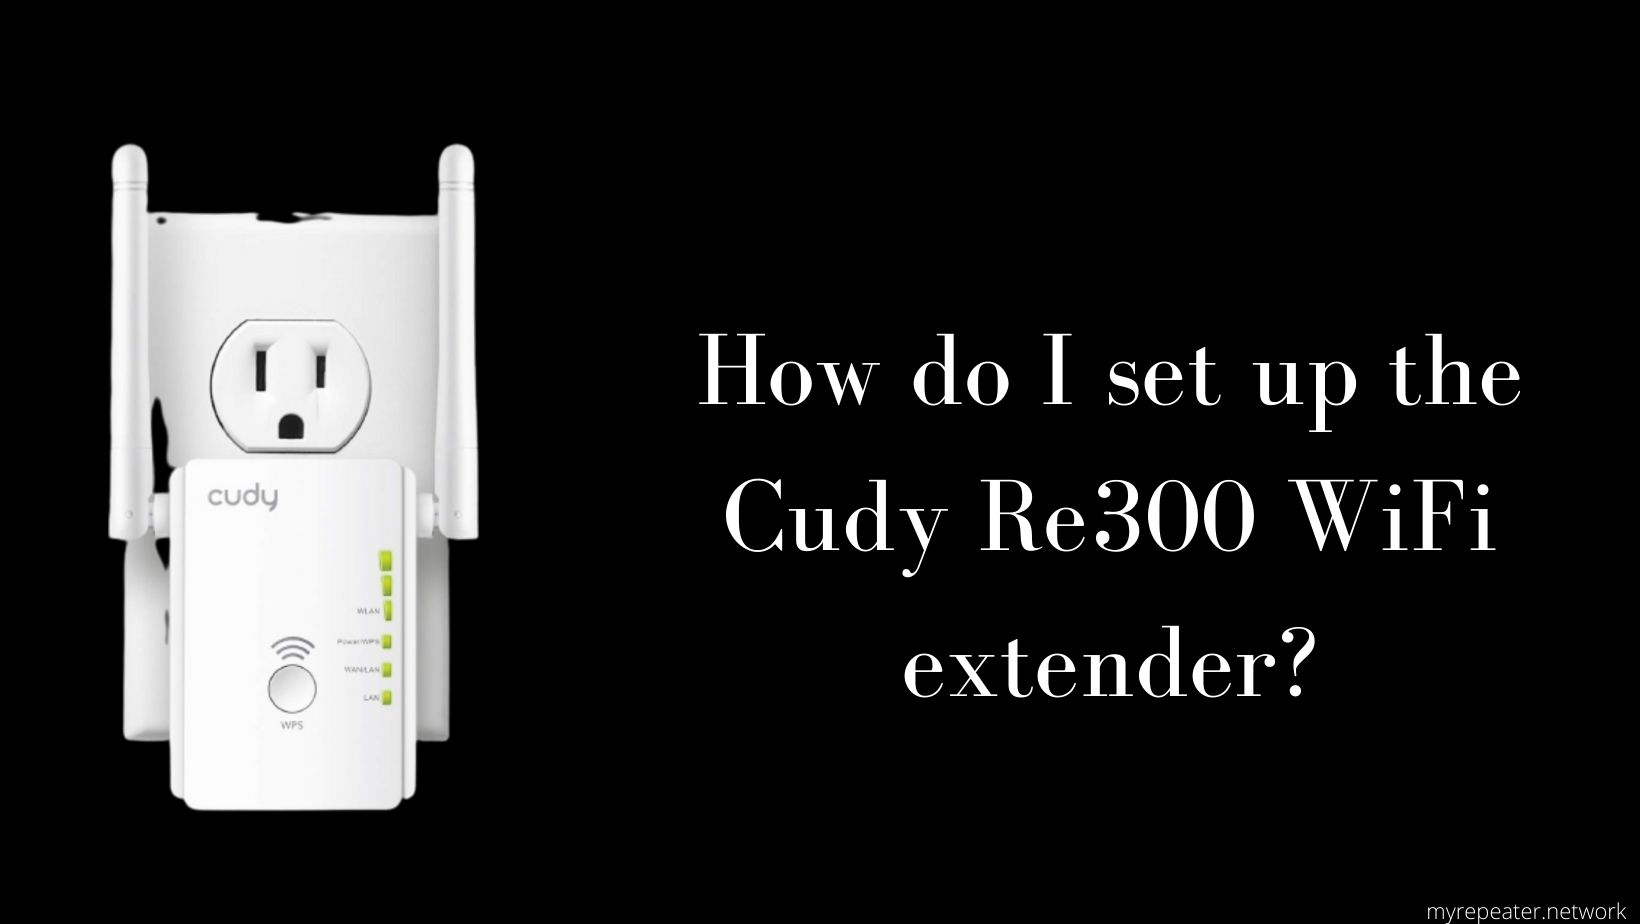 Setup the Cudy Re300 WiFi extender